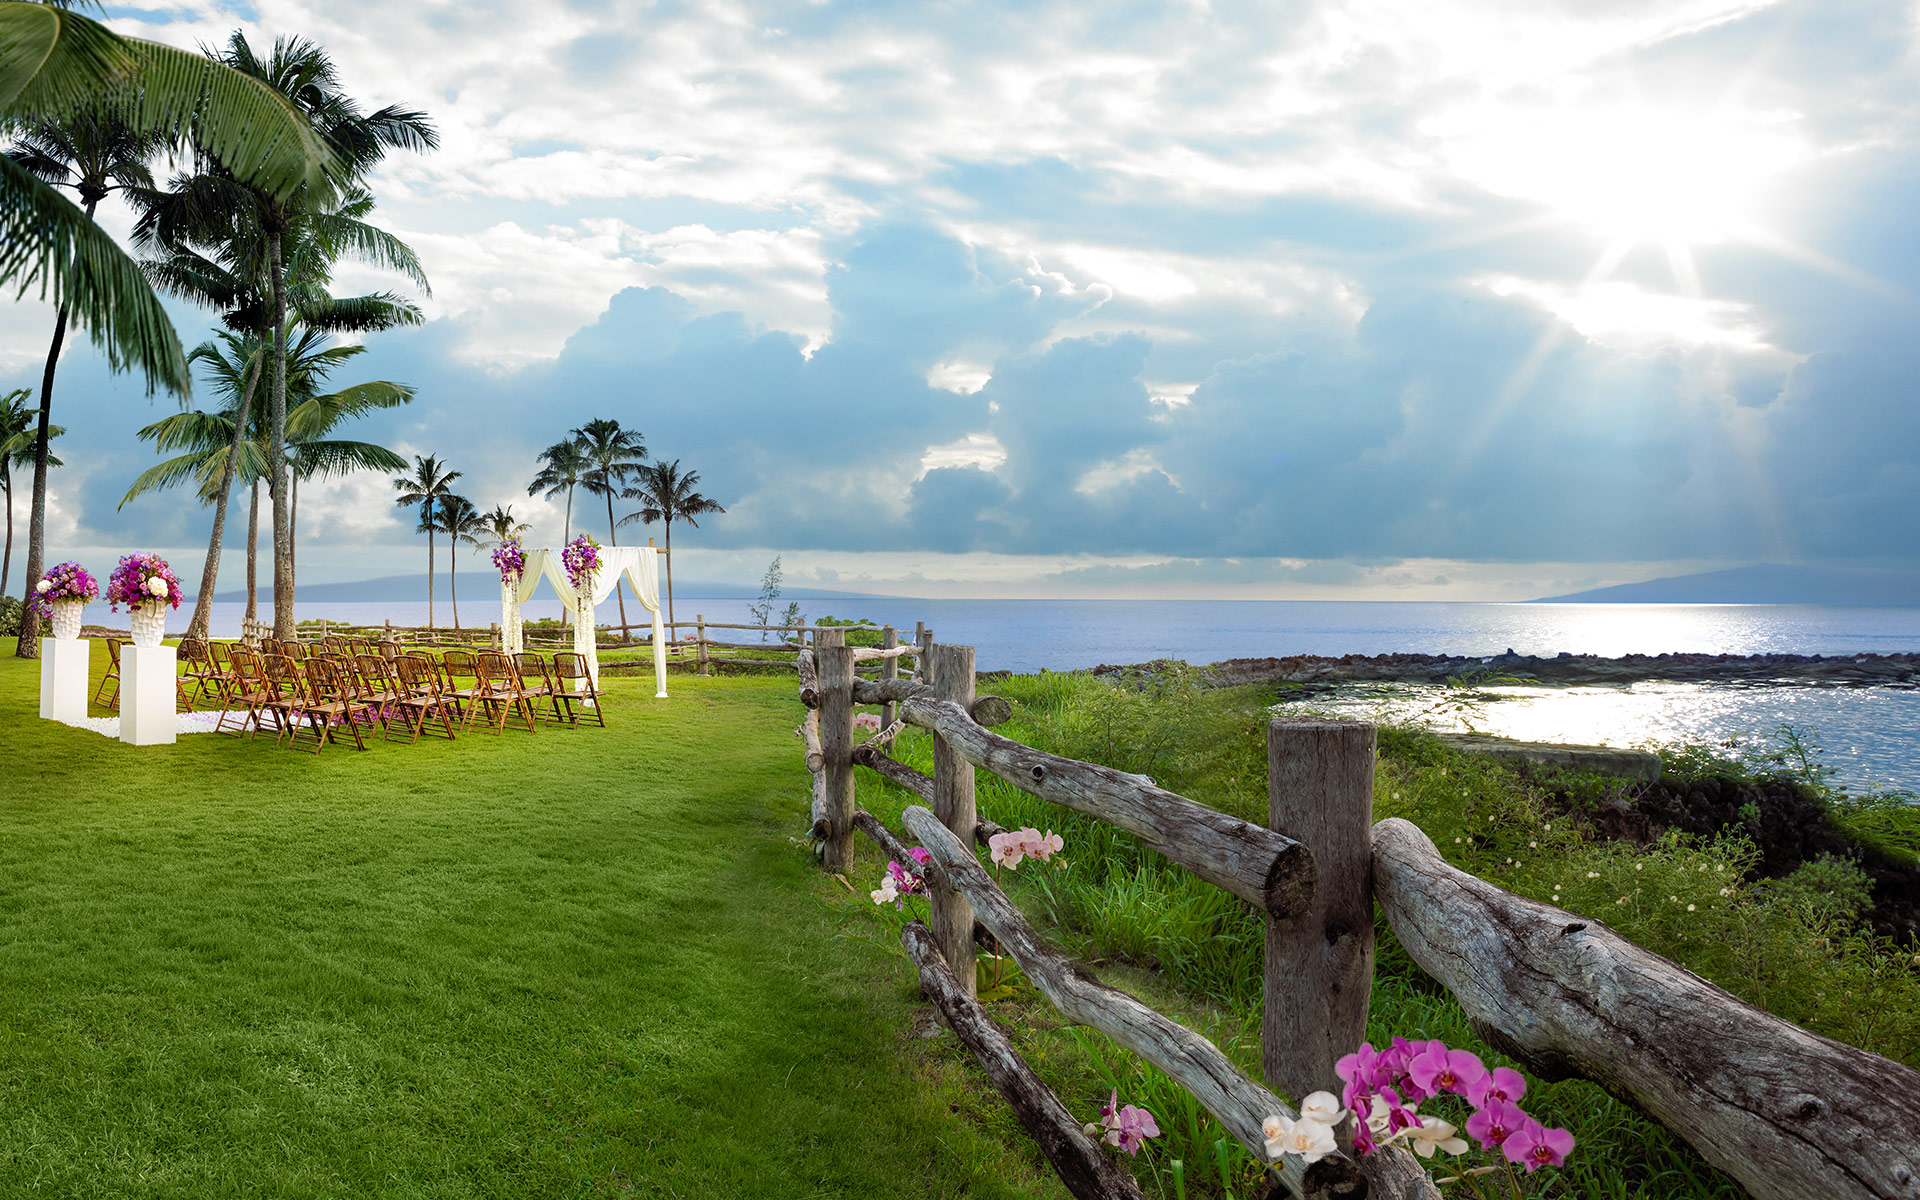 Wedding ceremony at Namalu Lawn located between The Cliff House and Kapalua Bay